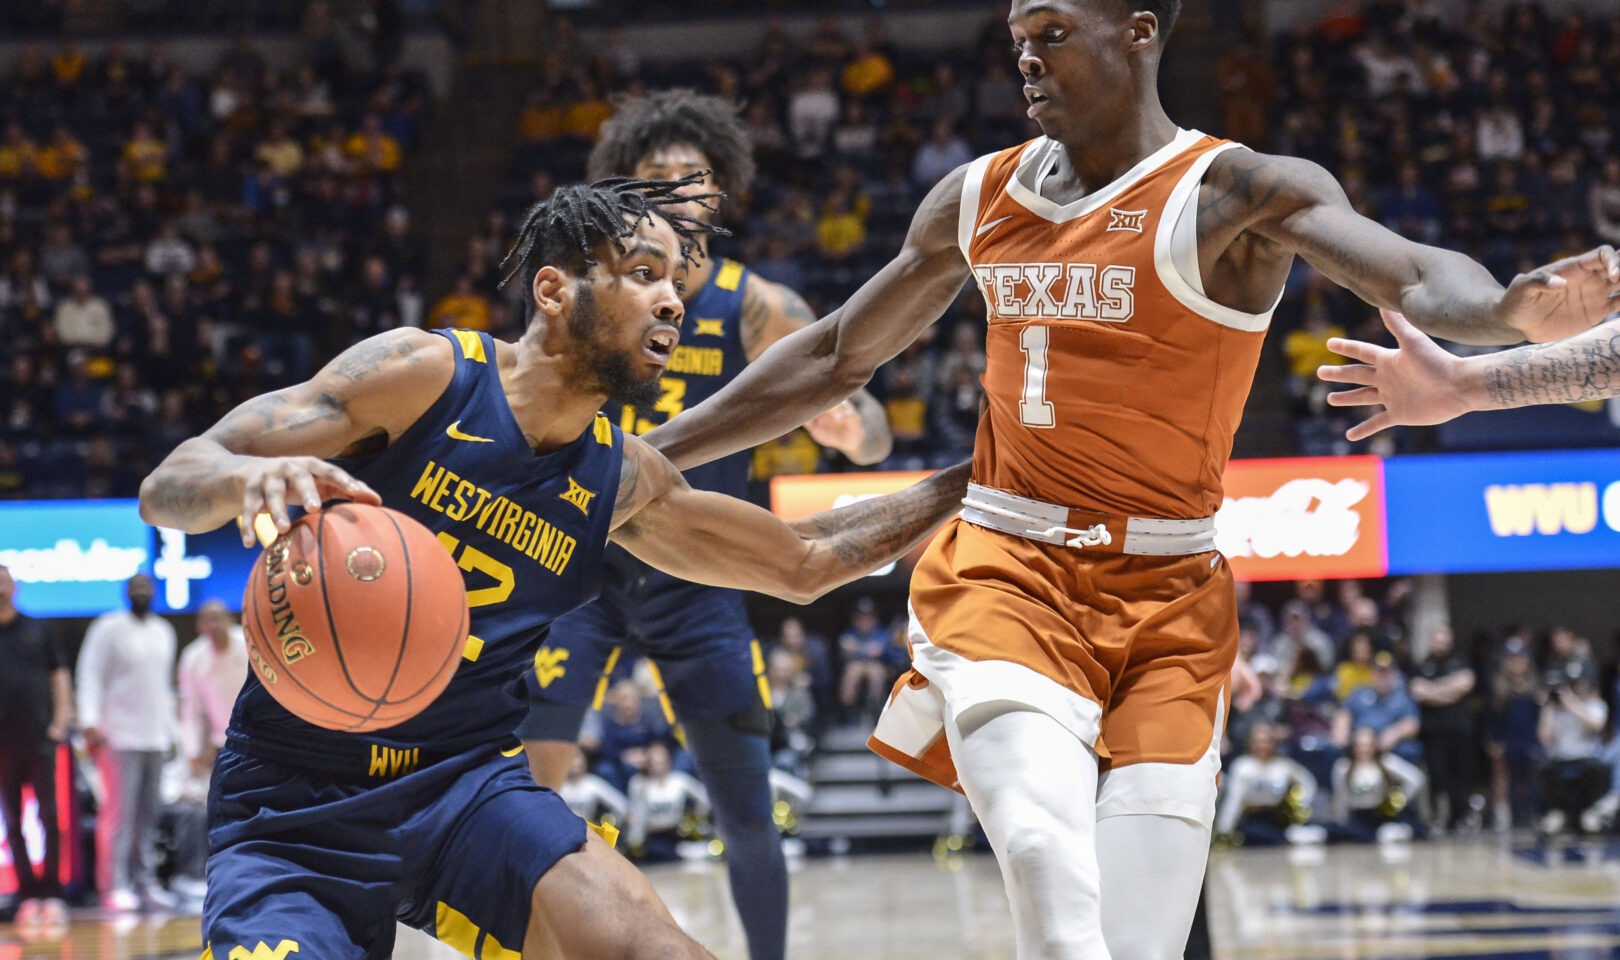 NOTEBOOK WVU let's another big lead slip away in second half vs. Texas